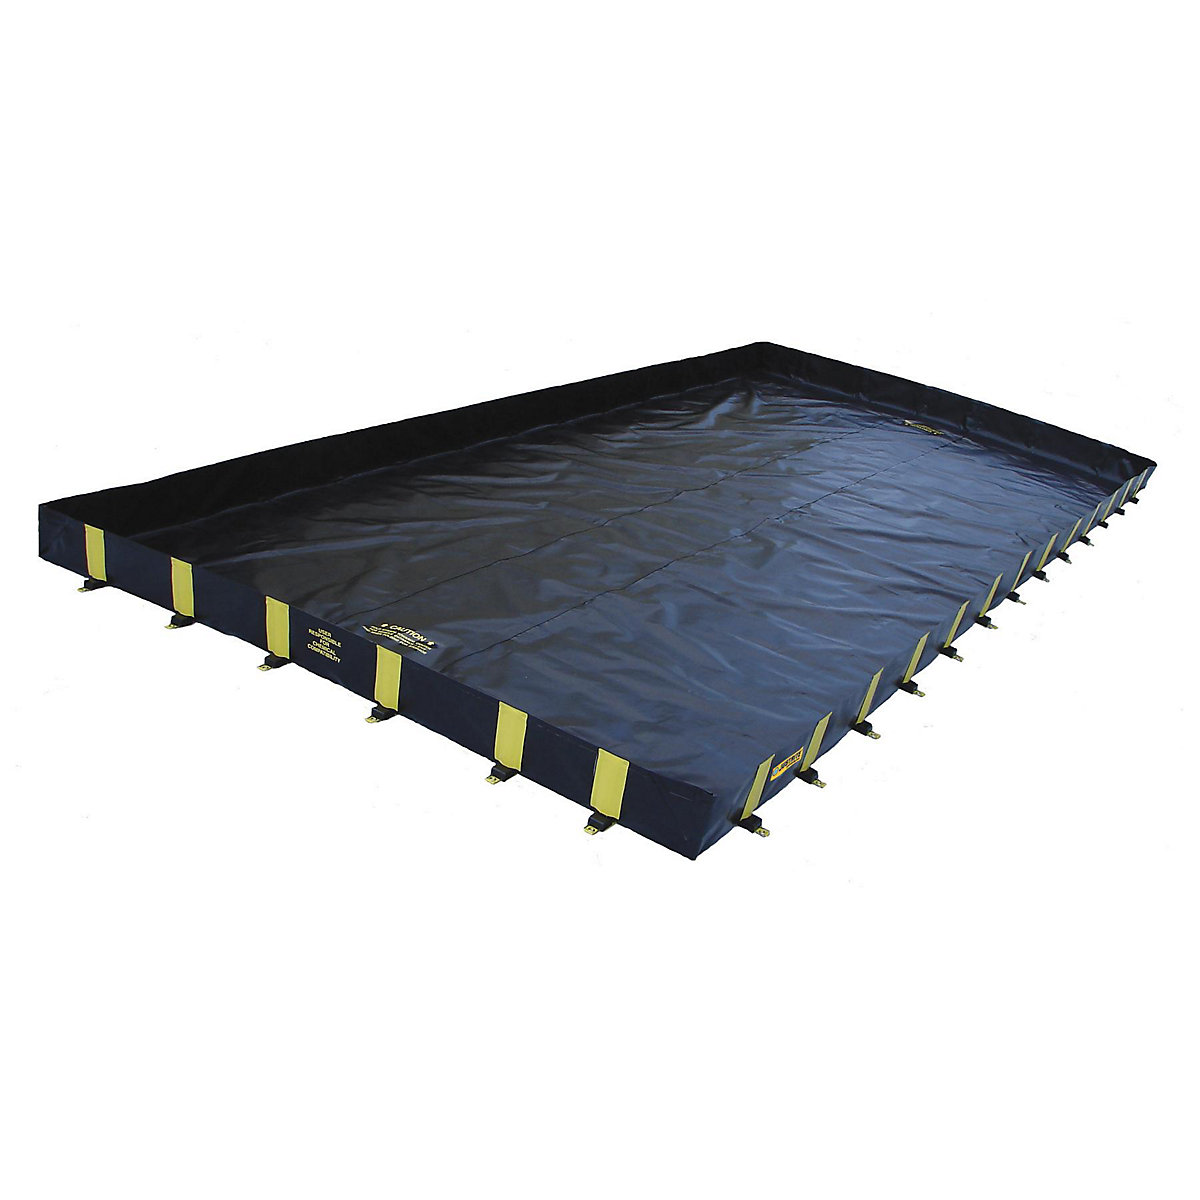 QuickBerm® XT rigid lock folding tray – Justrite, for frequent traffic, LxW 15.2 x 3.7 m-13